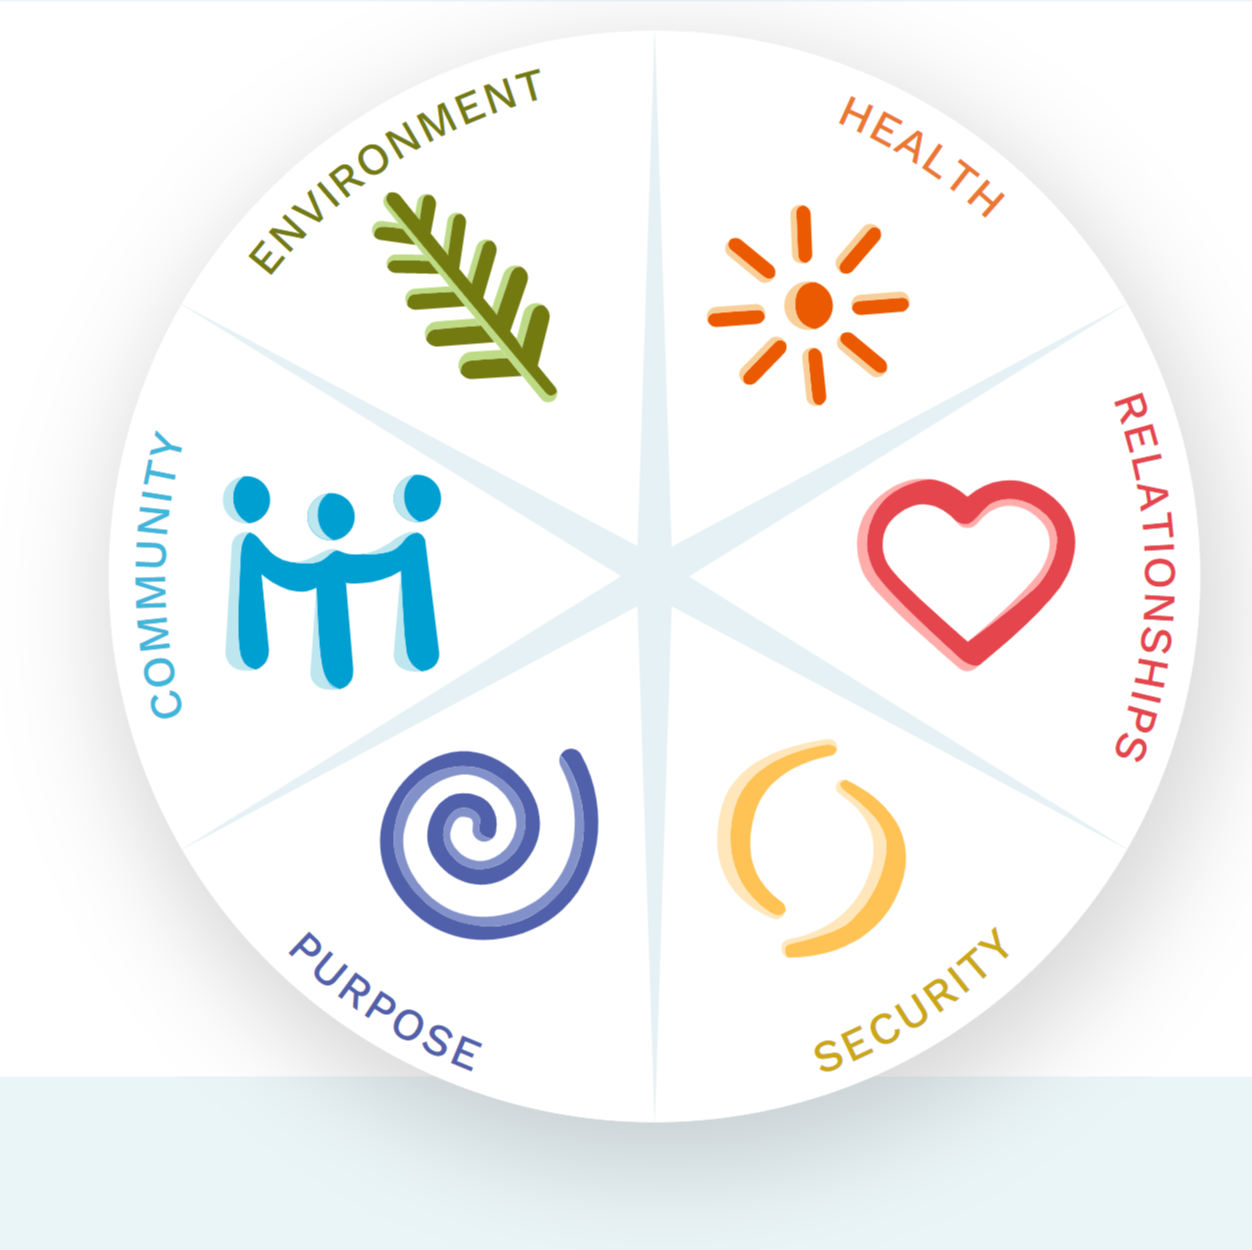 Pie chart showing the different elements of wellbeing: Environment, health, relationships, security, purpose, and community